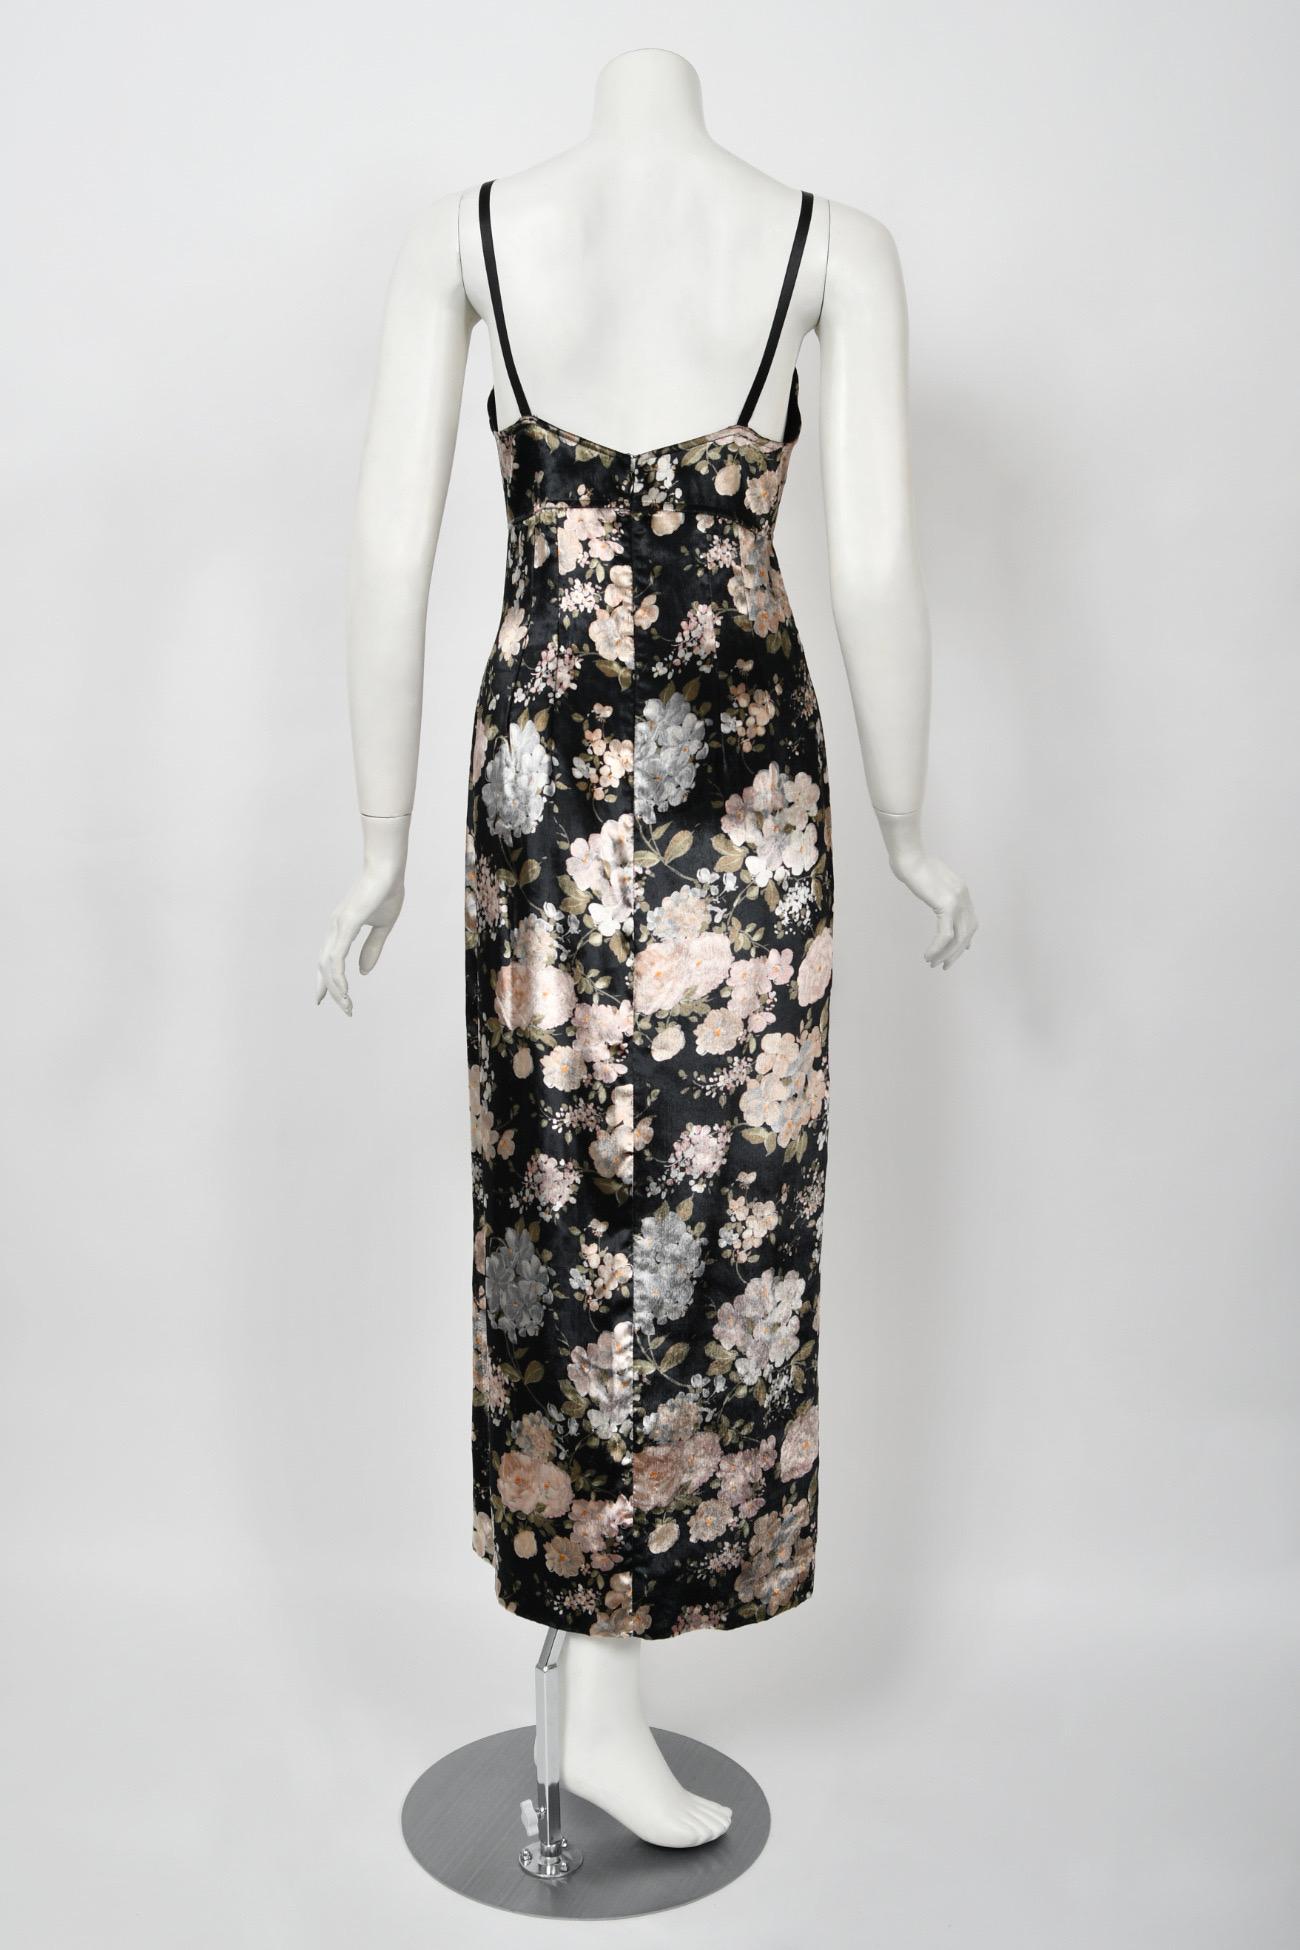 1997 Dolce & Gabbana Floral Stretch Velvet Cut-Out Bustier Slip Dress with Tags  For Sale 10